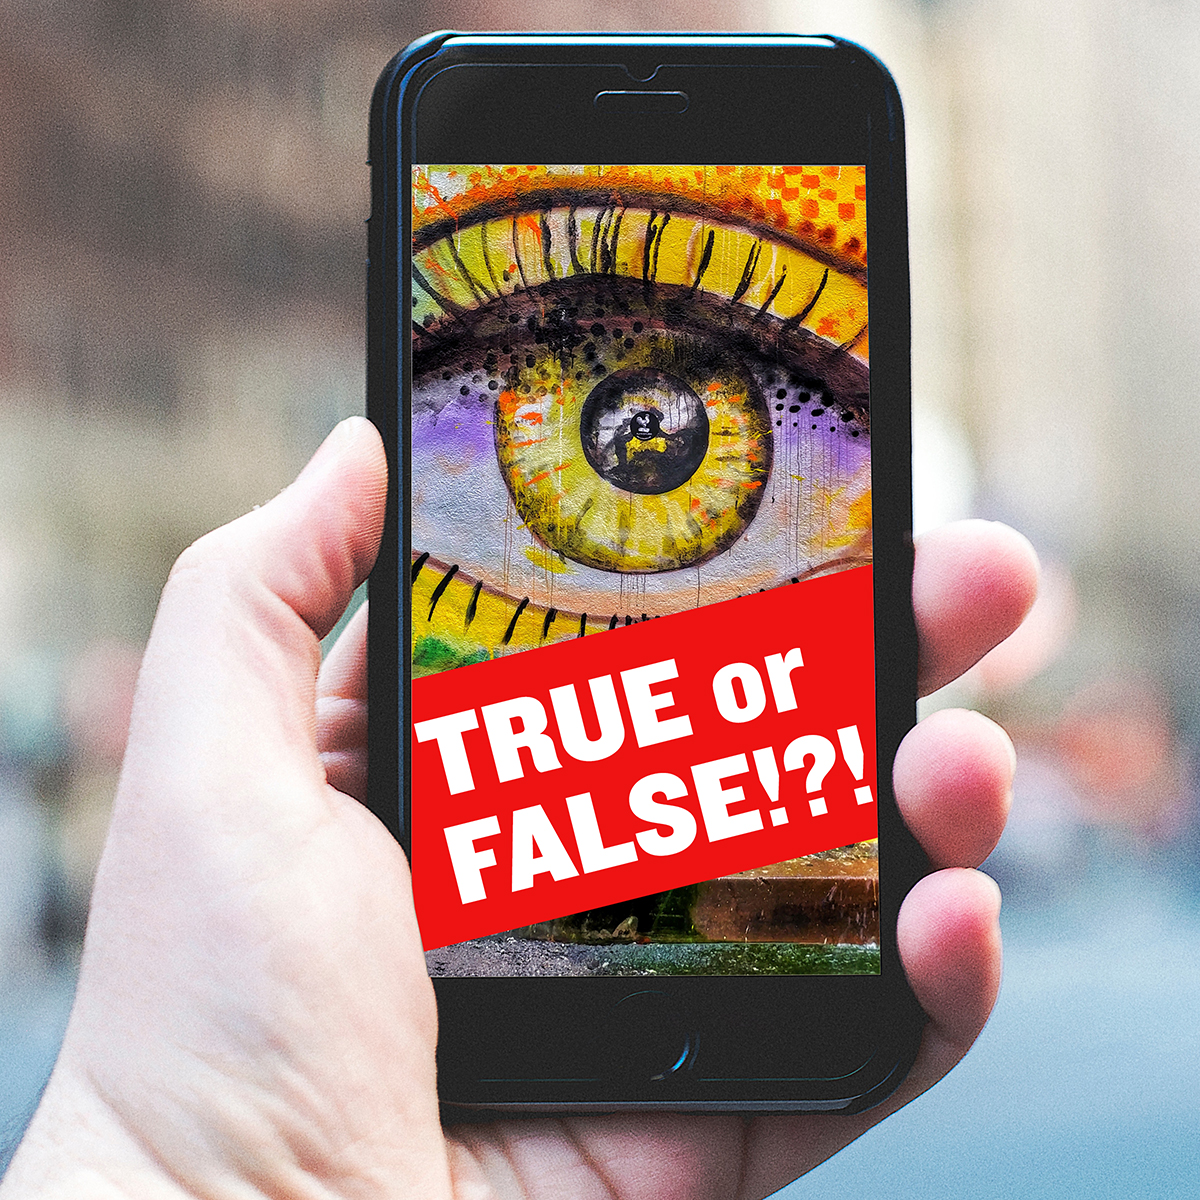 Hand holding smartphone with picture of eye and a banner saying "TRUE or FALSE!?!"